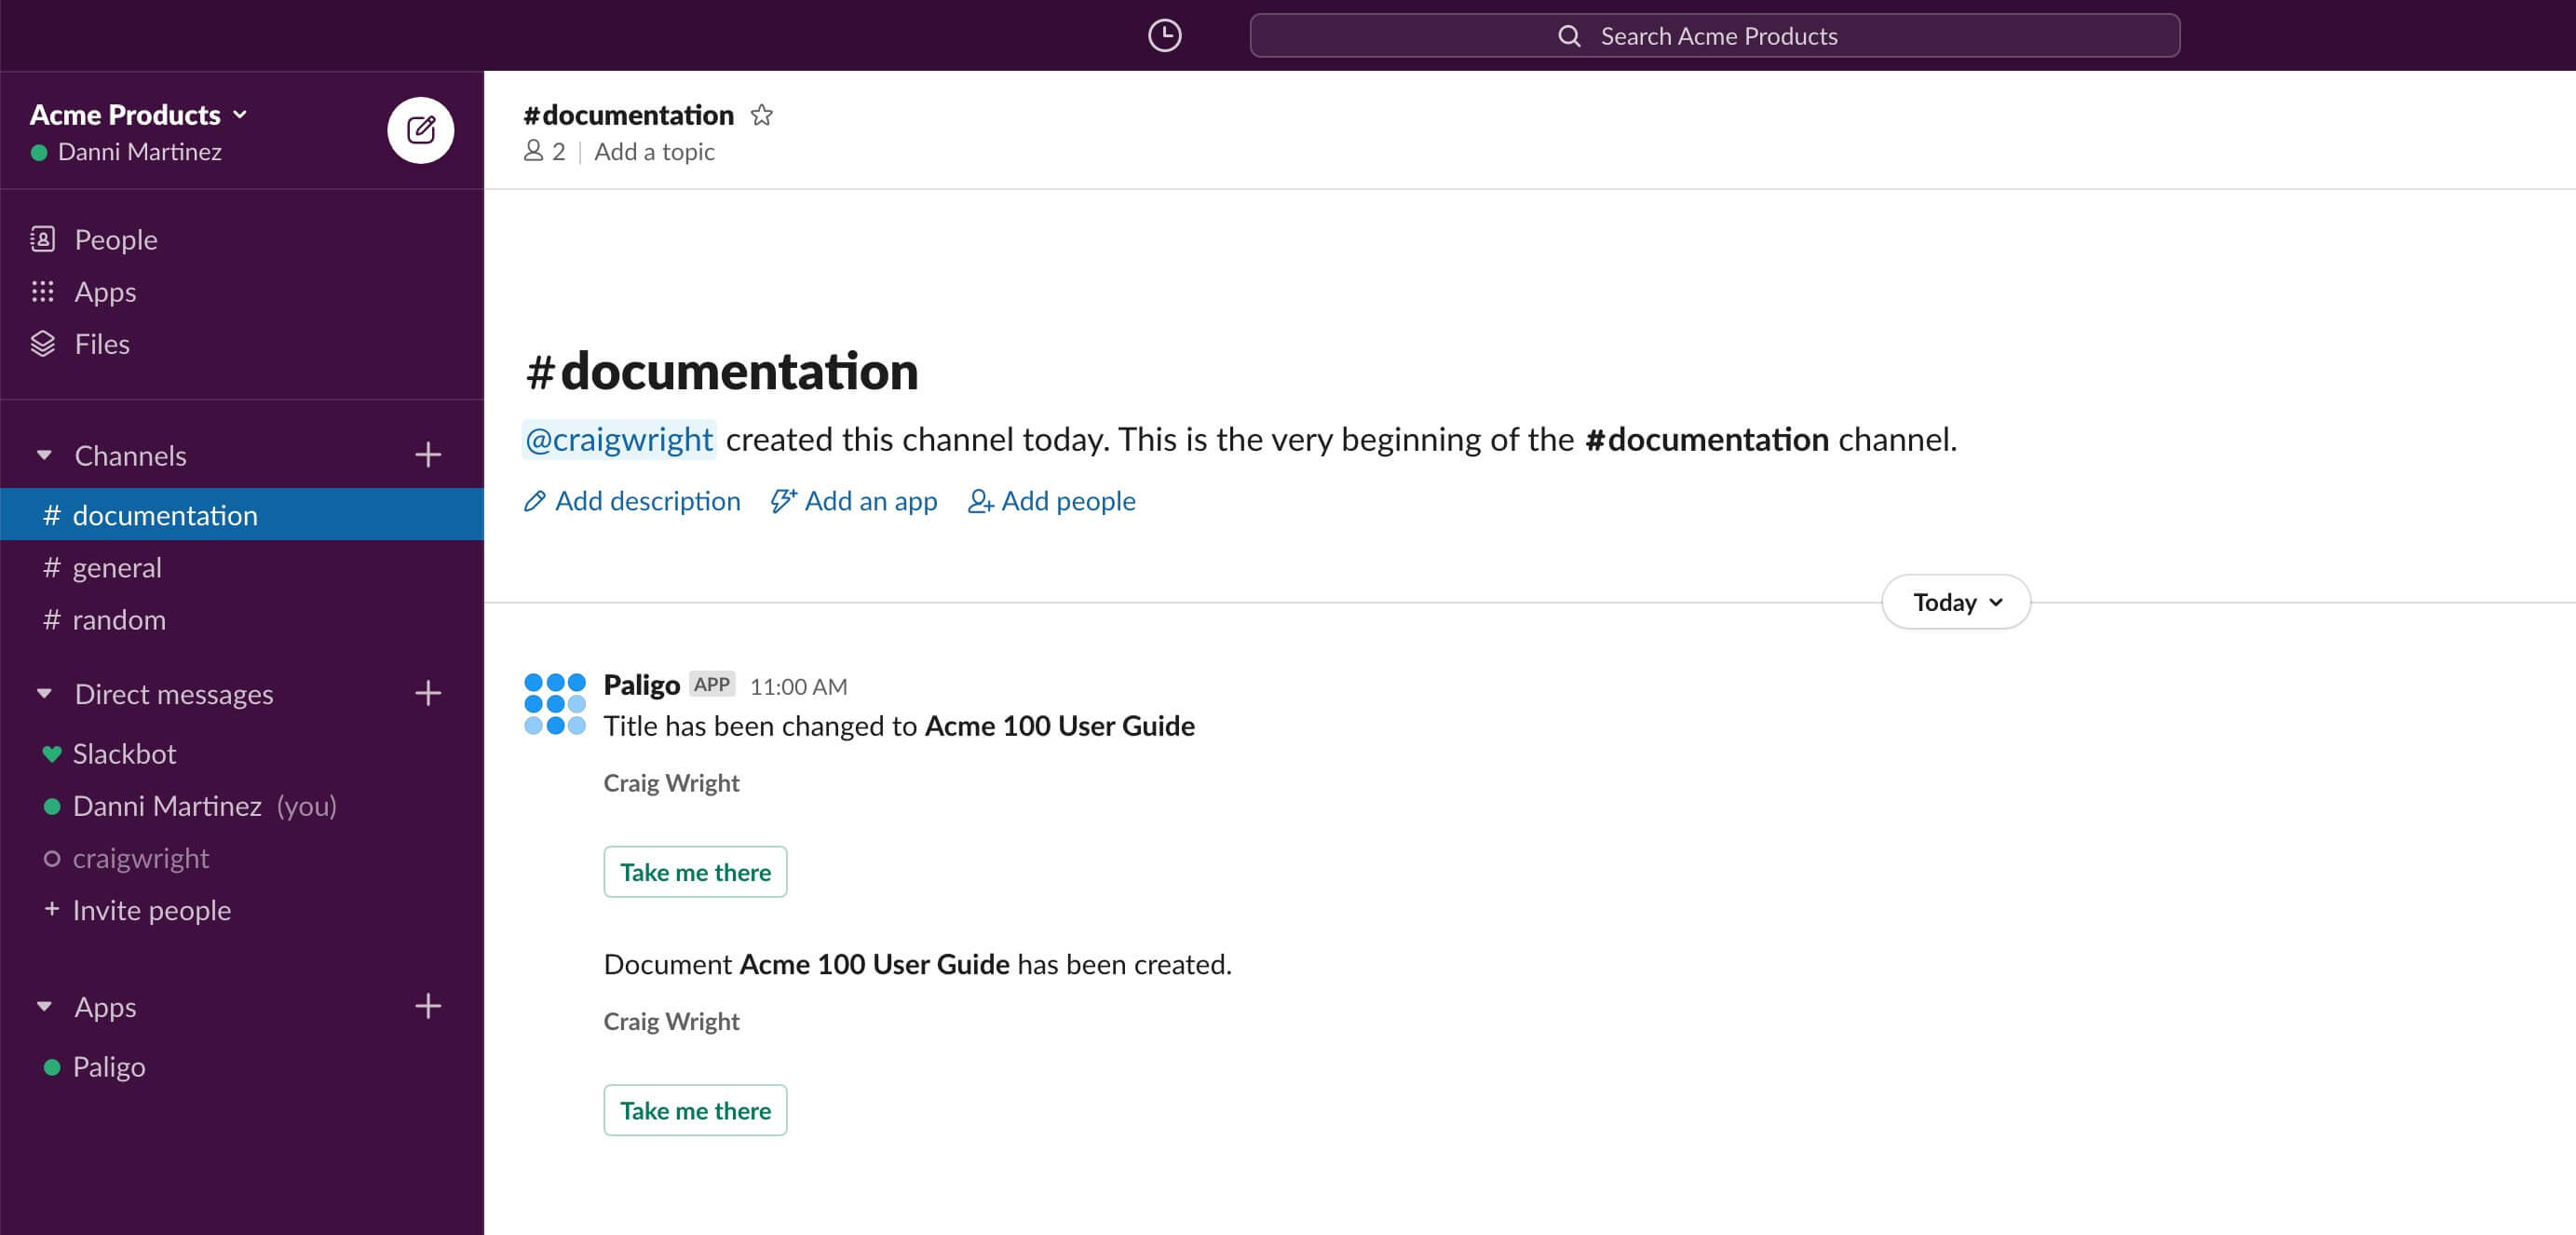 Slack showing an activity feed notification from Paligo. It is shown in a #documentation channel.